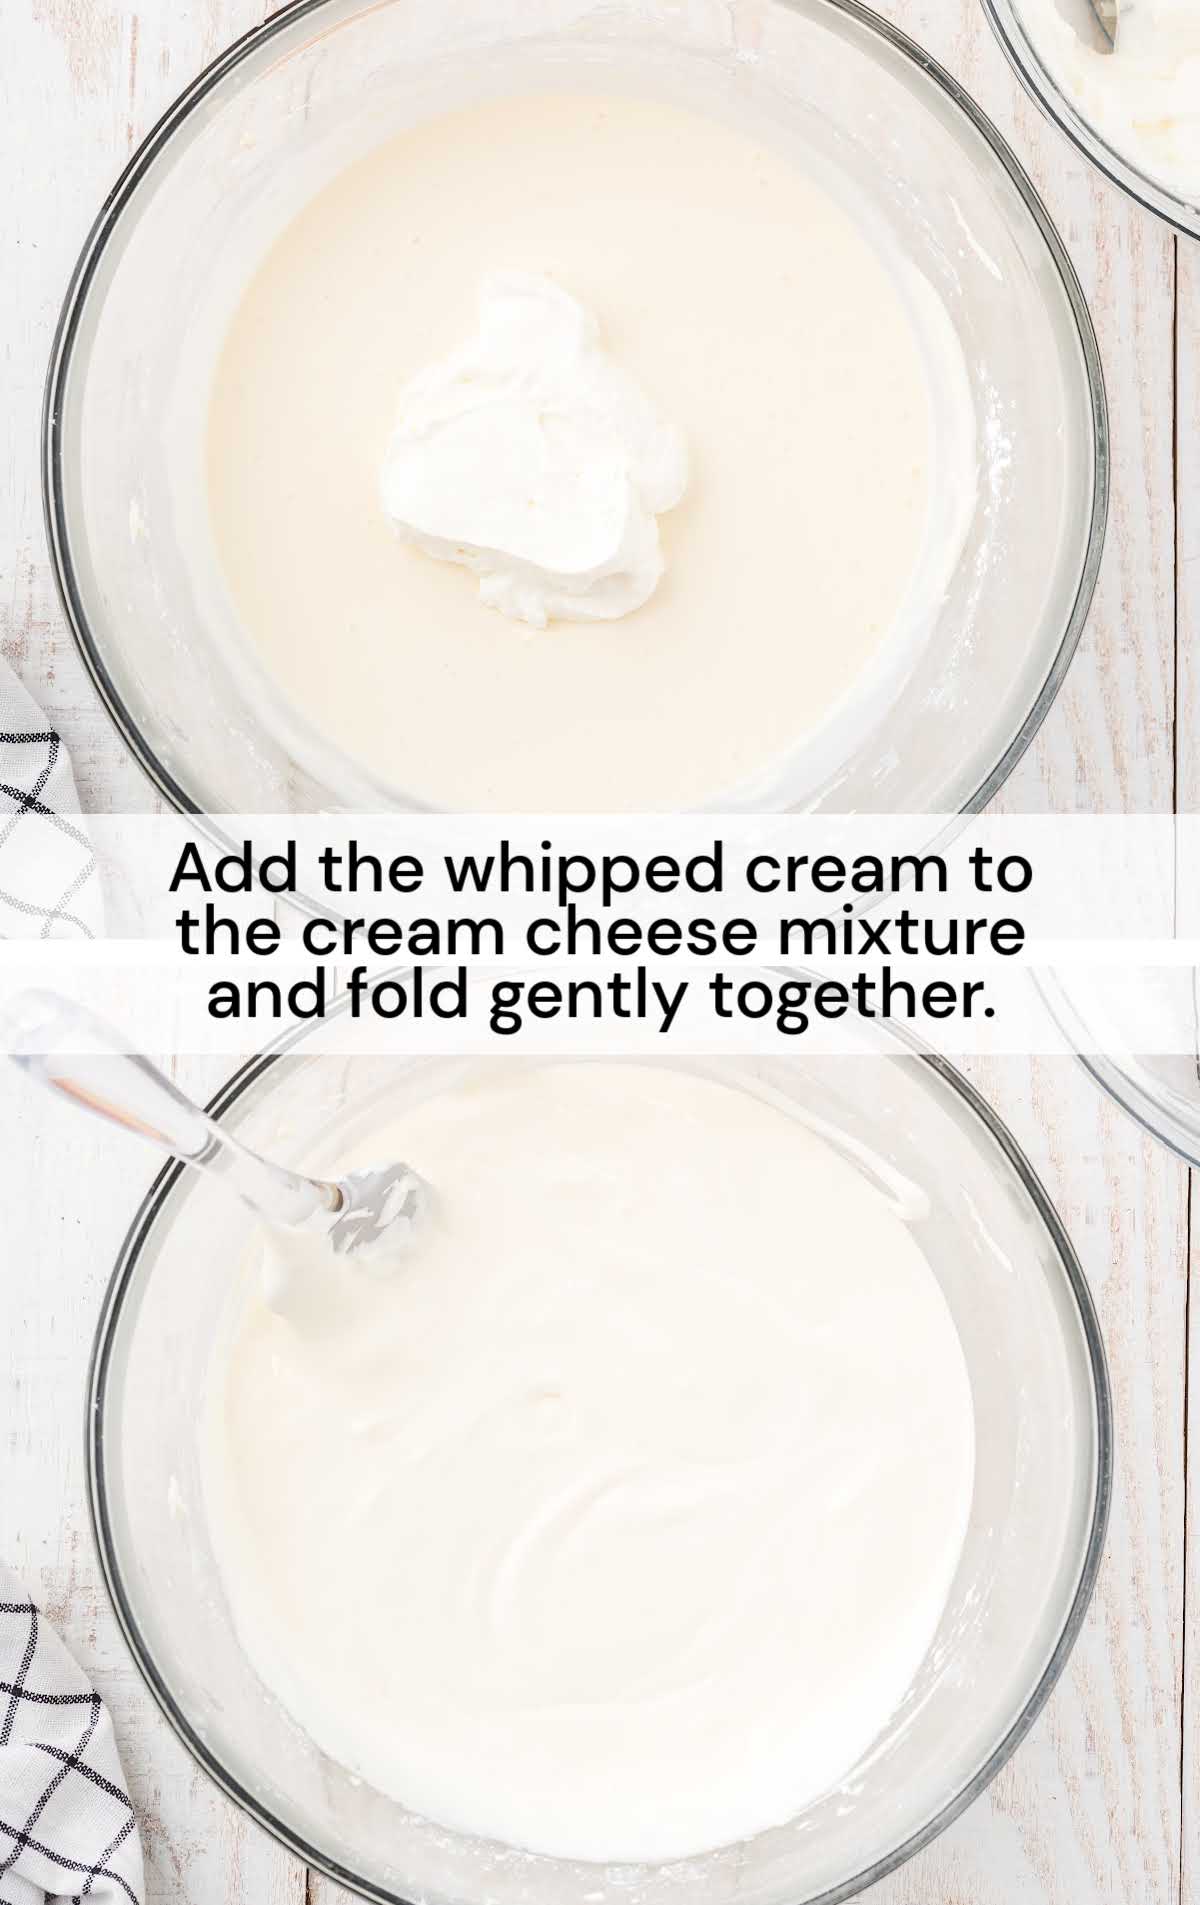 whipped cream added to the cream cheese mixture and folded together in a bowl